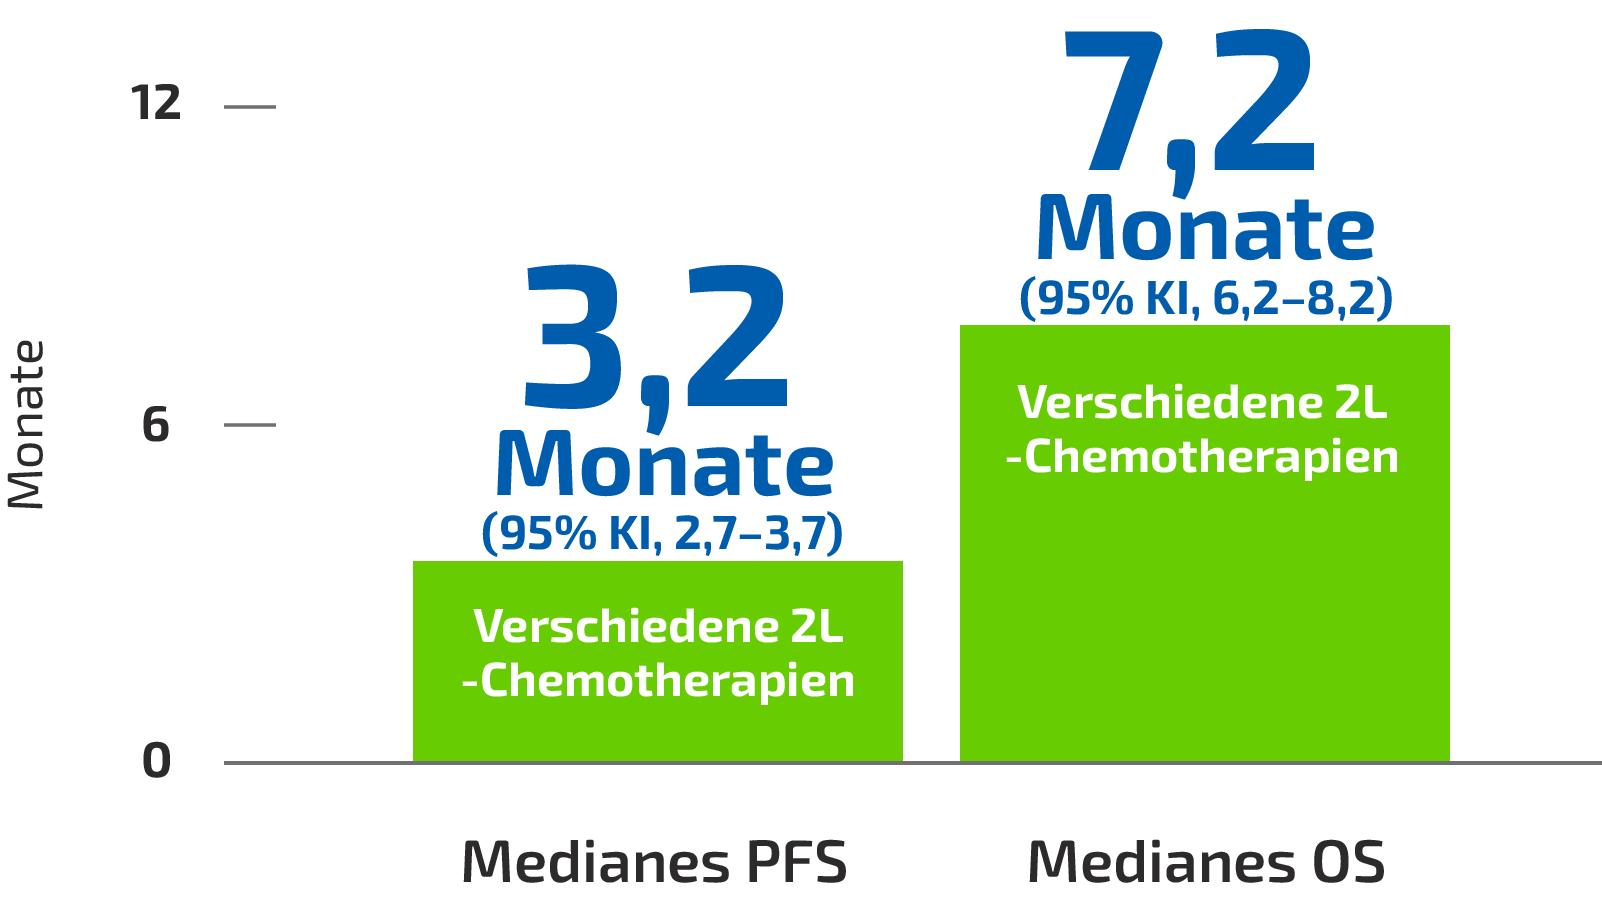 Systematic review of 2l chemotherapies